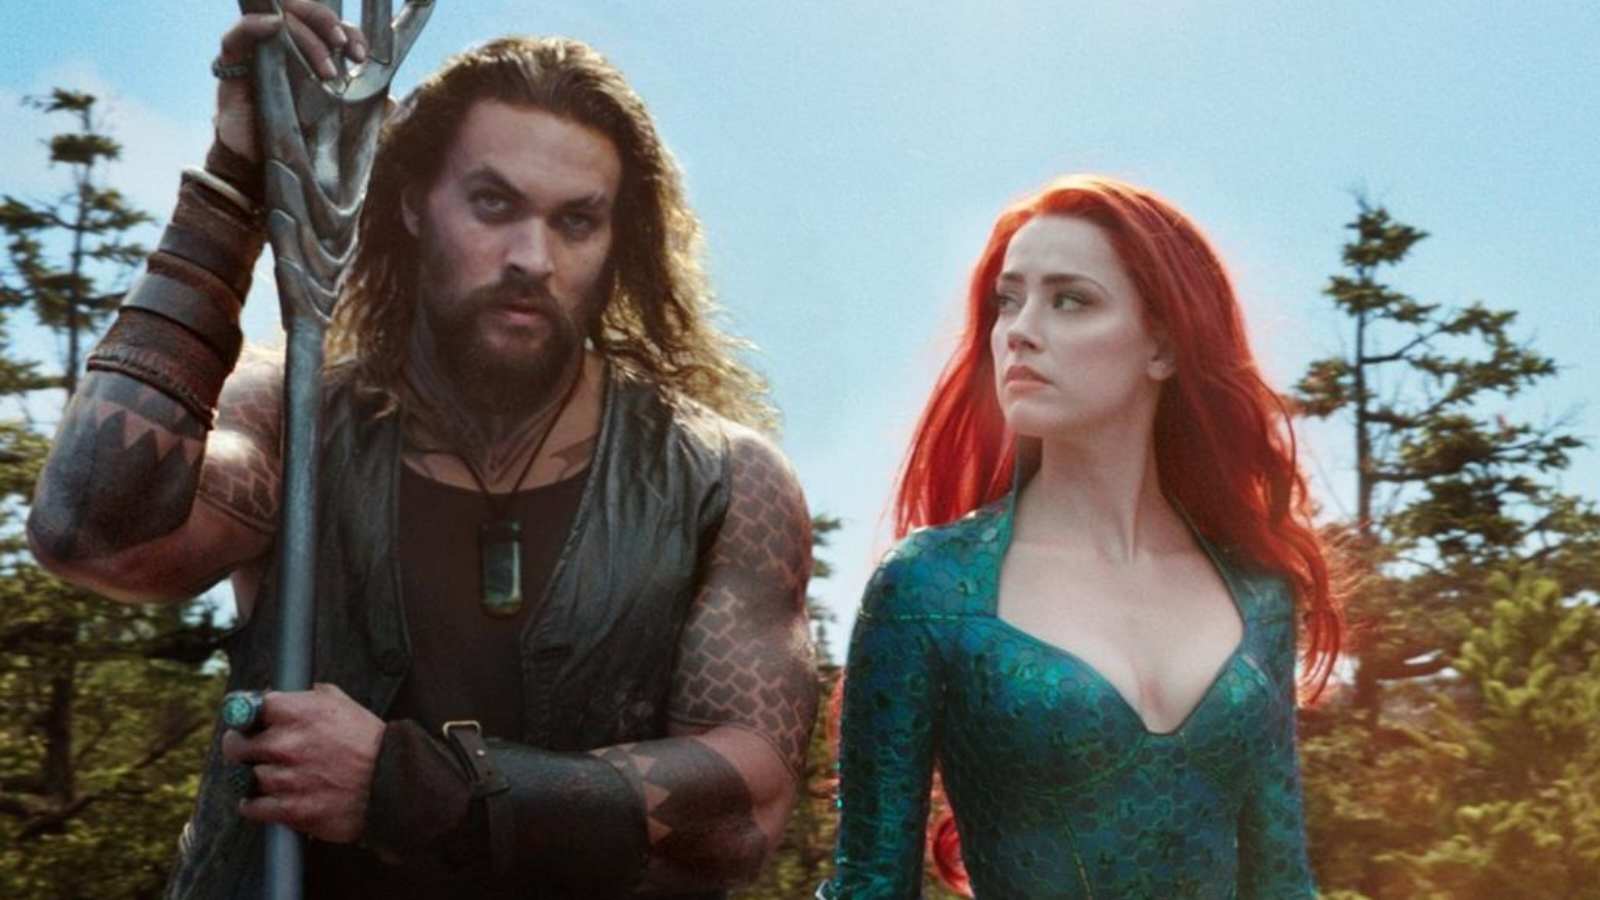 Amber Heard has confirmed reports her role in the Aquaman sequel has been drastically cut.